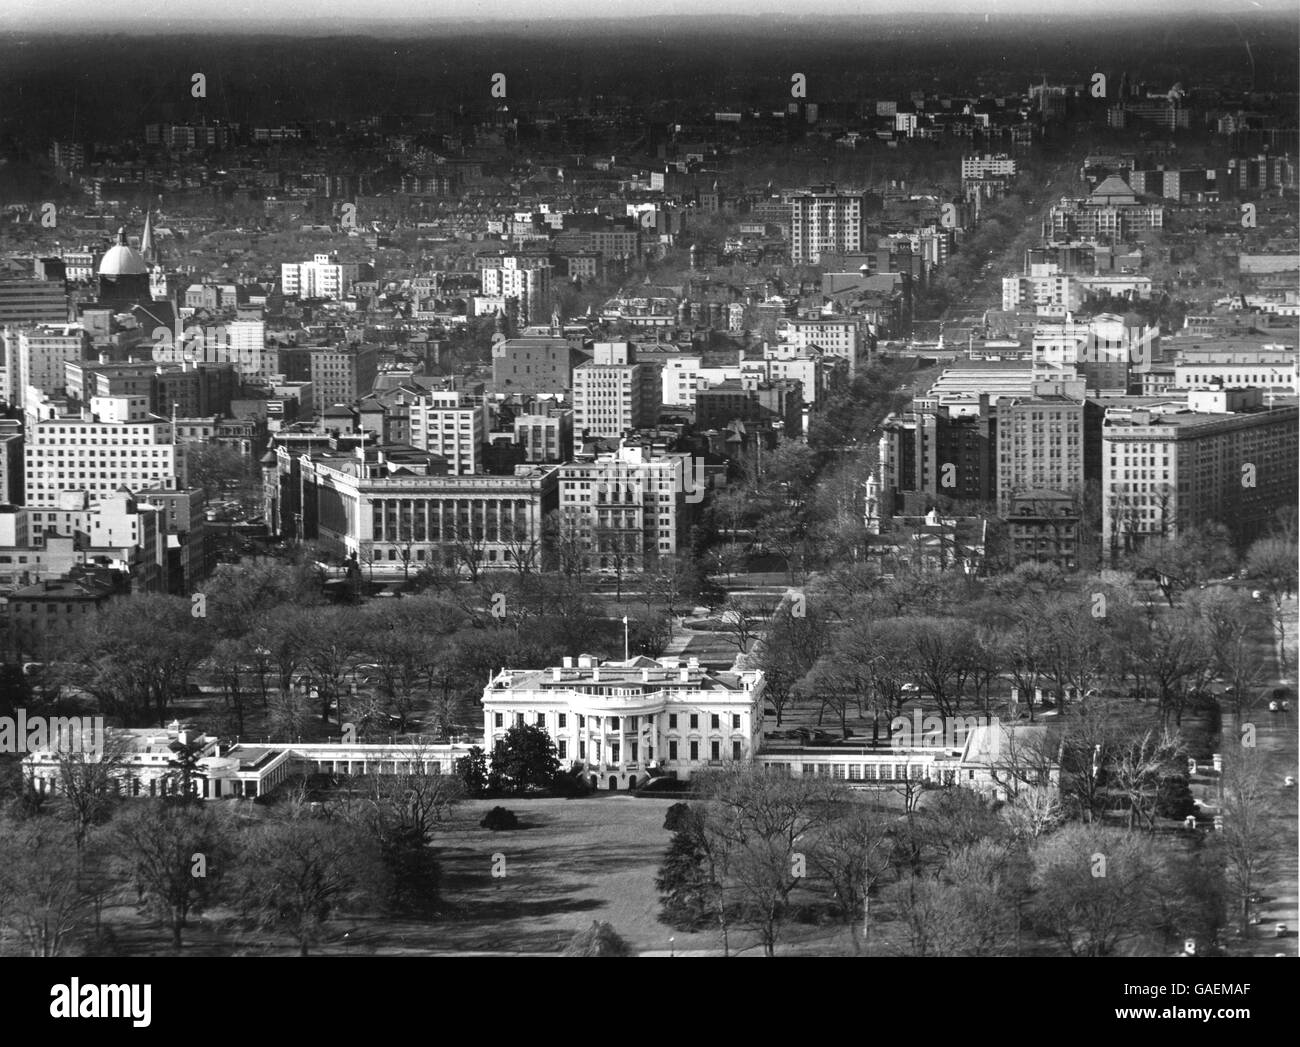 Telephoto view of the back of the White House and surrounding area. Stock Photo